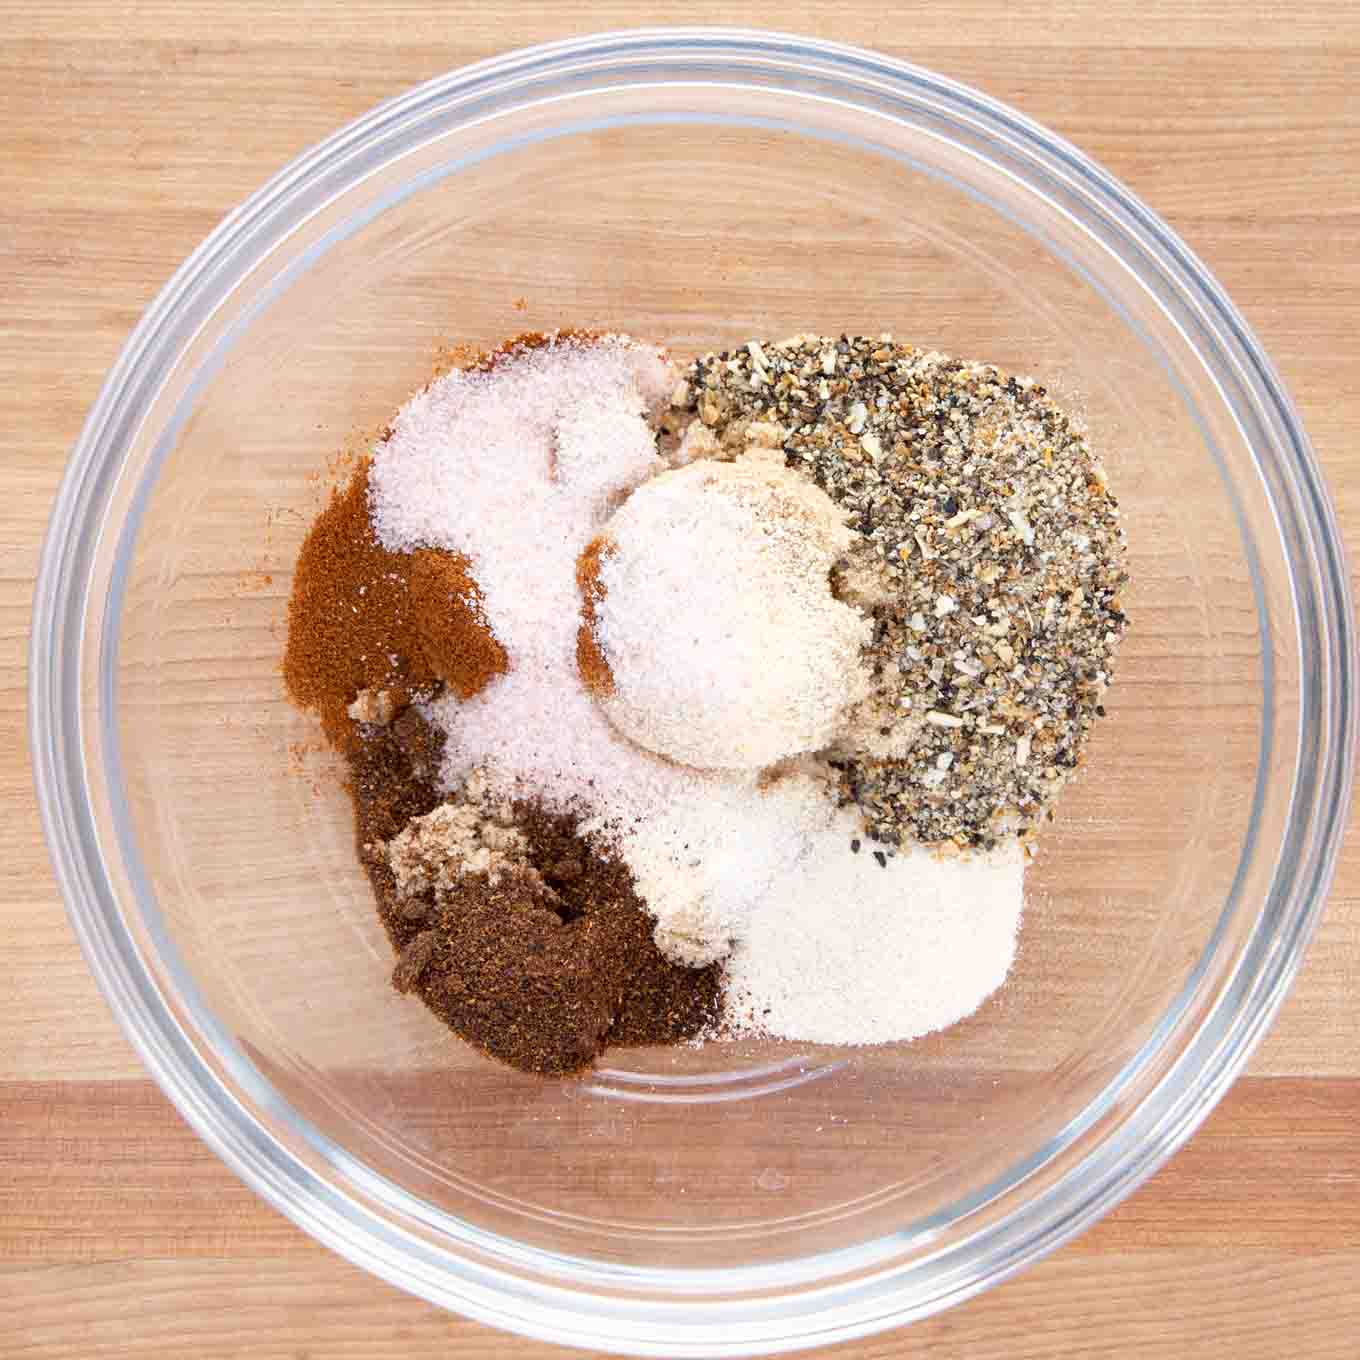 dry rub spices in glass bowl